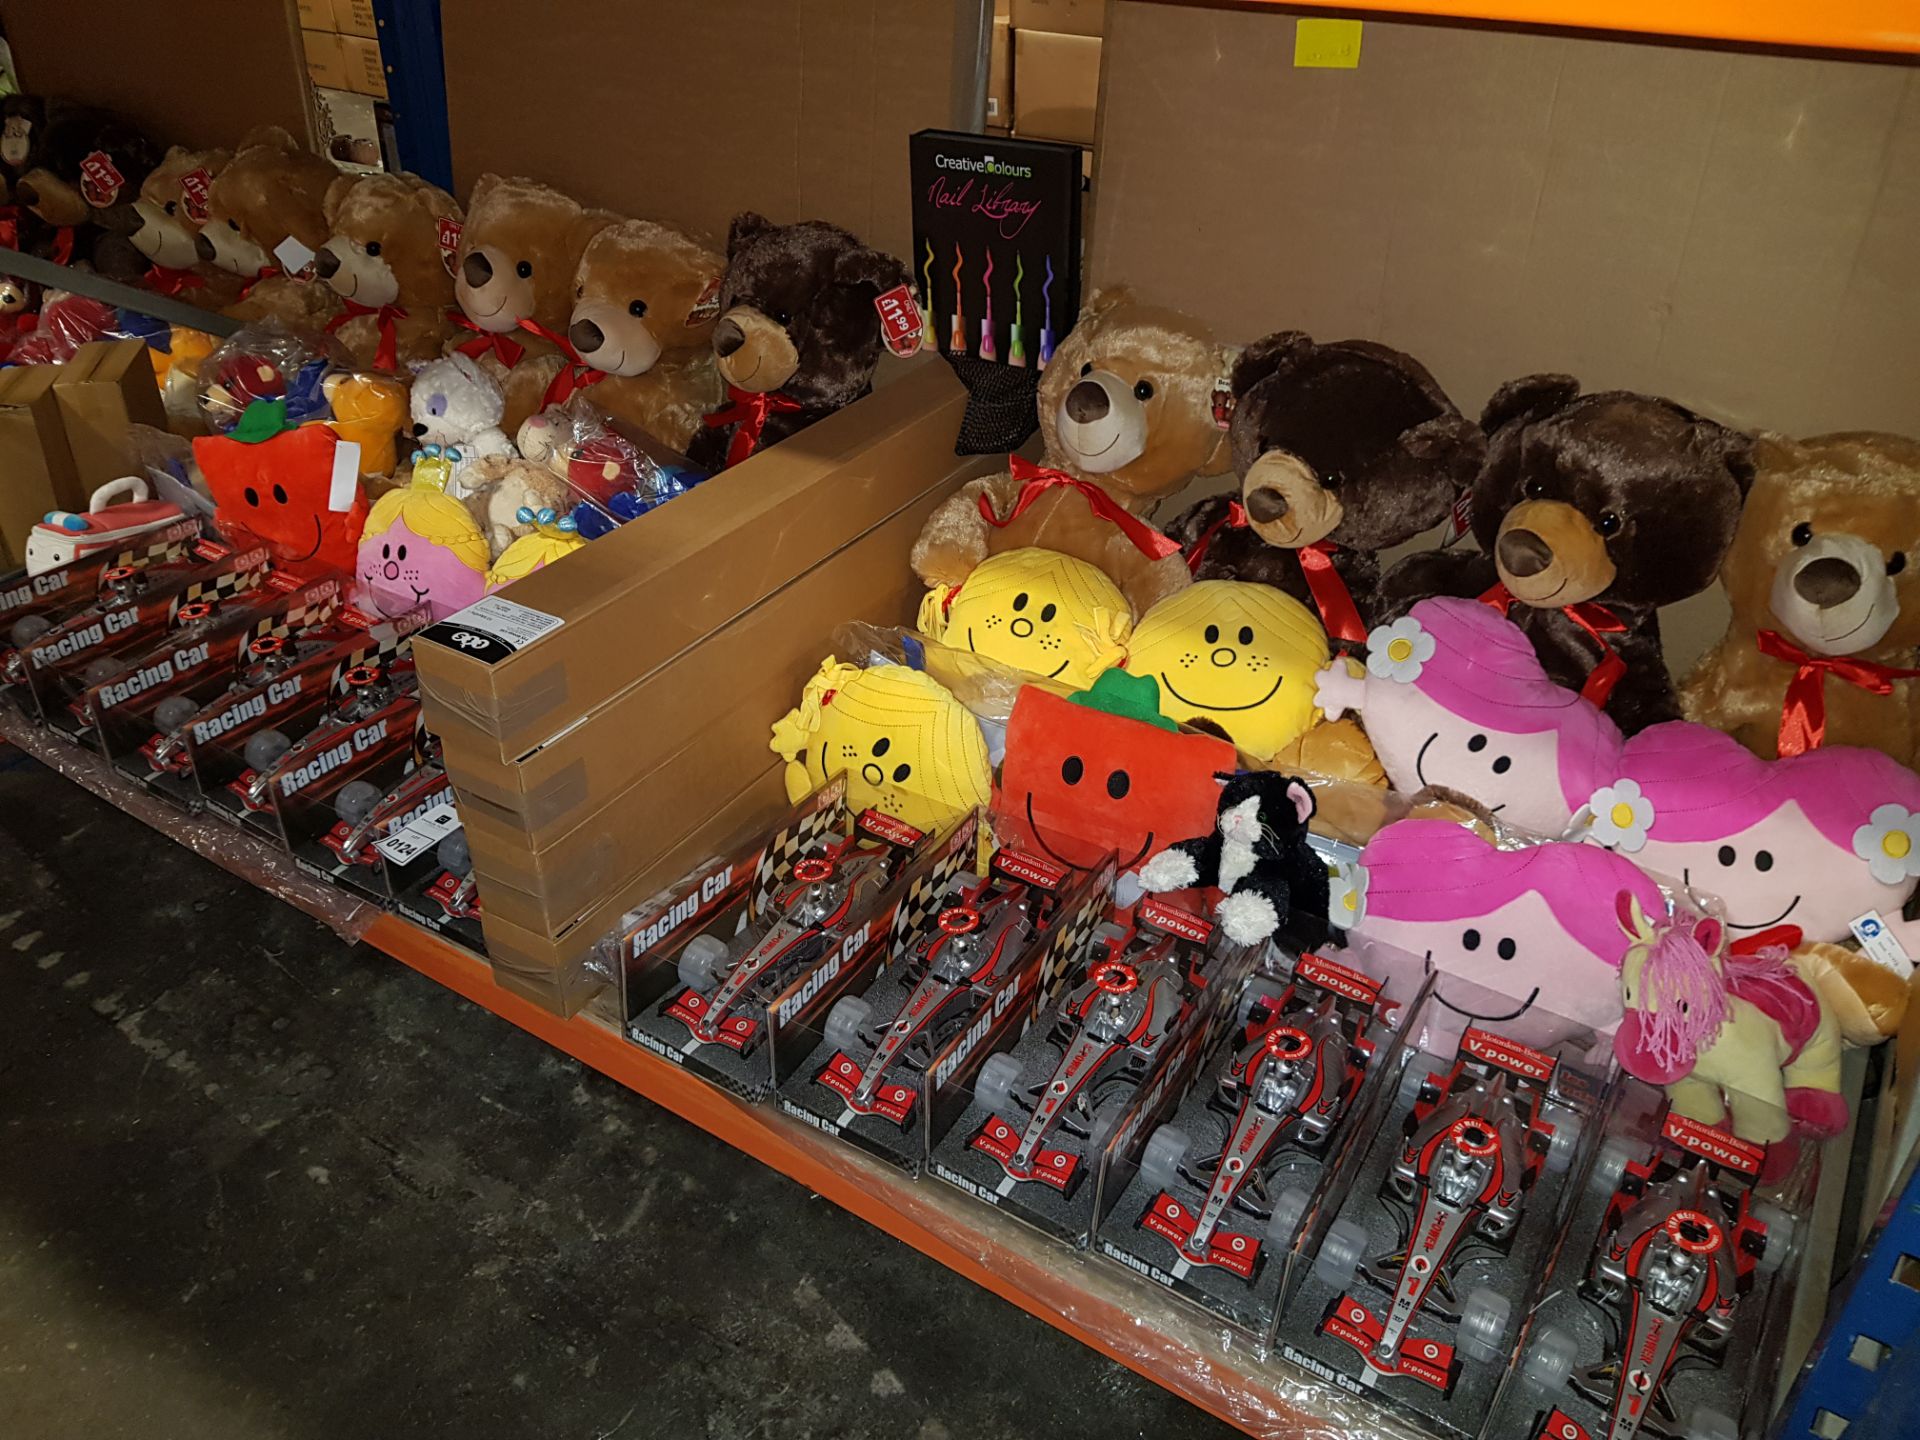 APPROX 50+ PIECE MIXED TOY LOT CONTAINING V-POWER RACING CARS, BEAR HUGS SOFT TOYS, TTS SOFT TOYS,